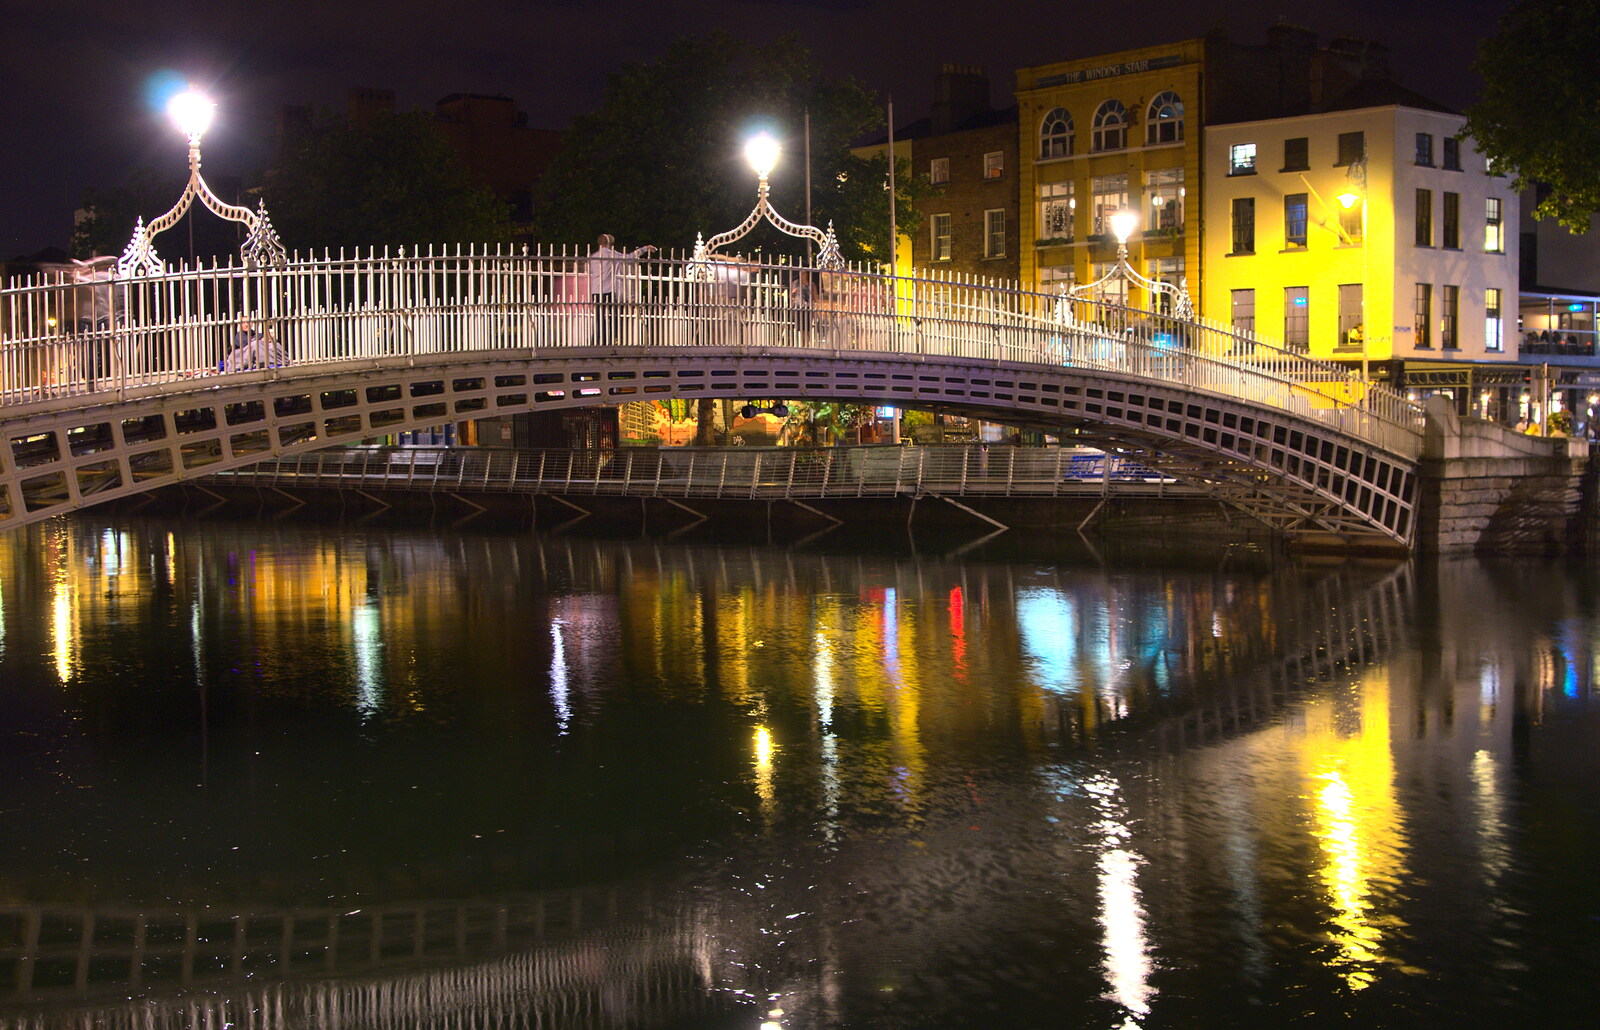 The Halfpenny Bridge and the Liffey from A Night Out in Dublin, County Dublin, Ireland - 9th August 2014